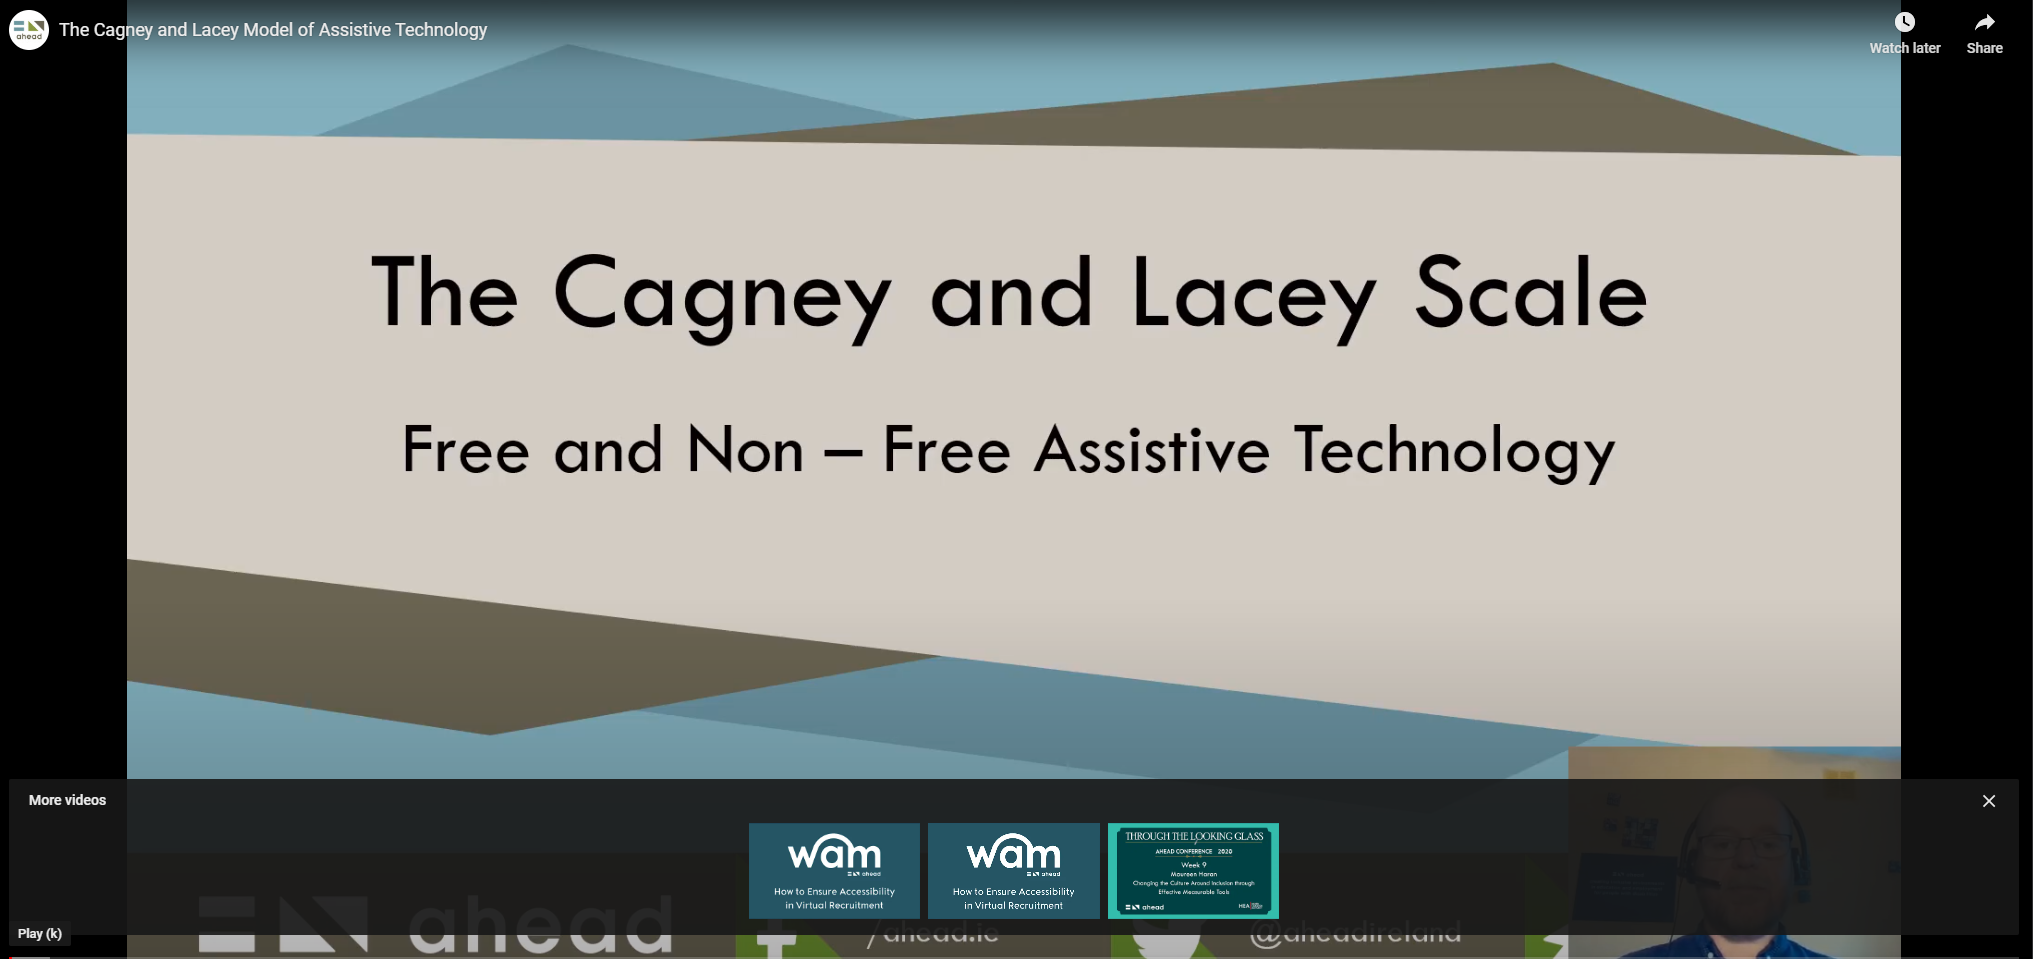 Cagney and Lacey Model of Assistive Technology by Trevor Boland - Screenshot